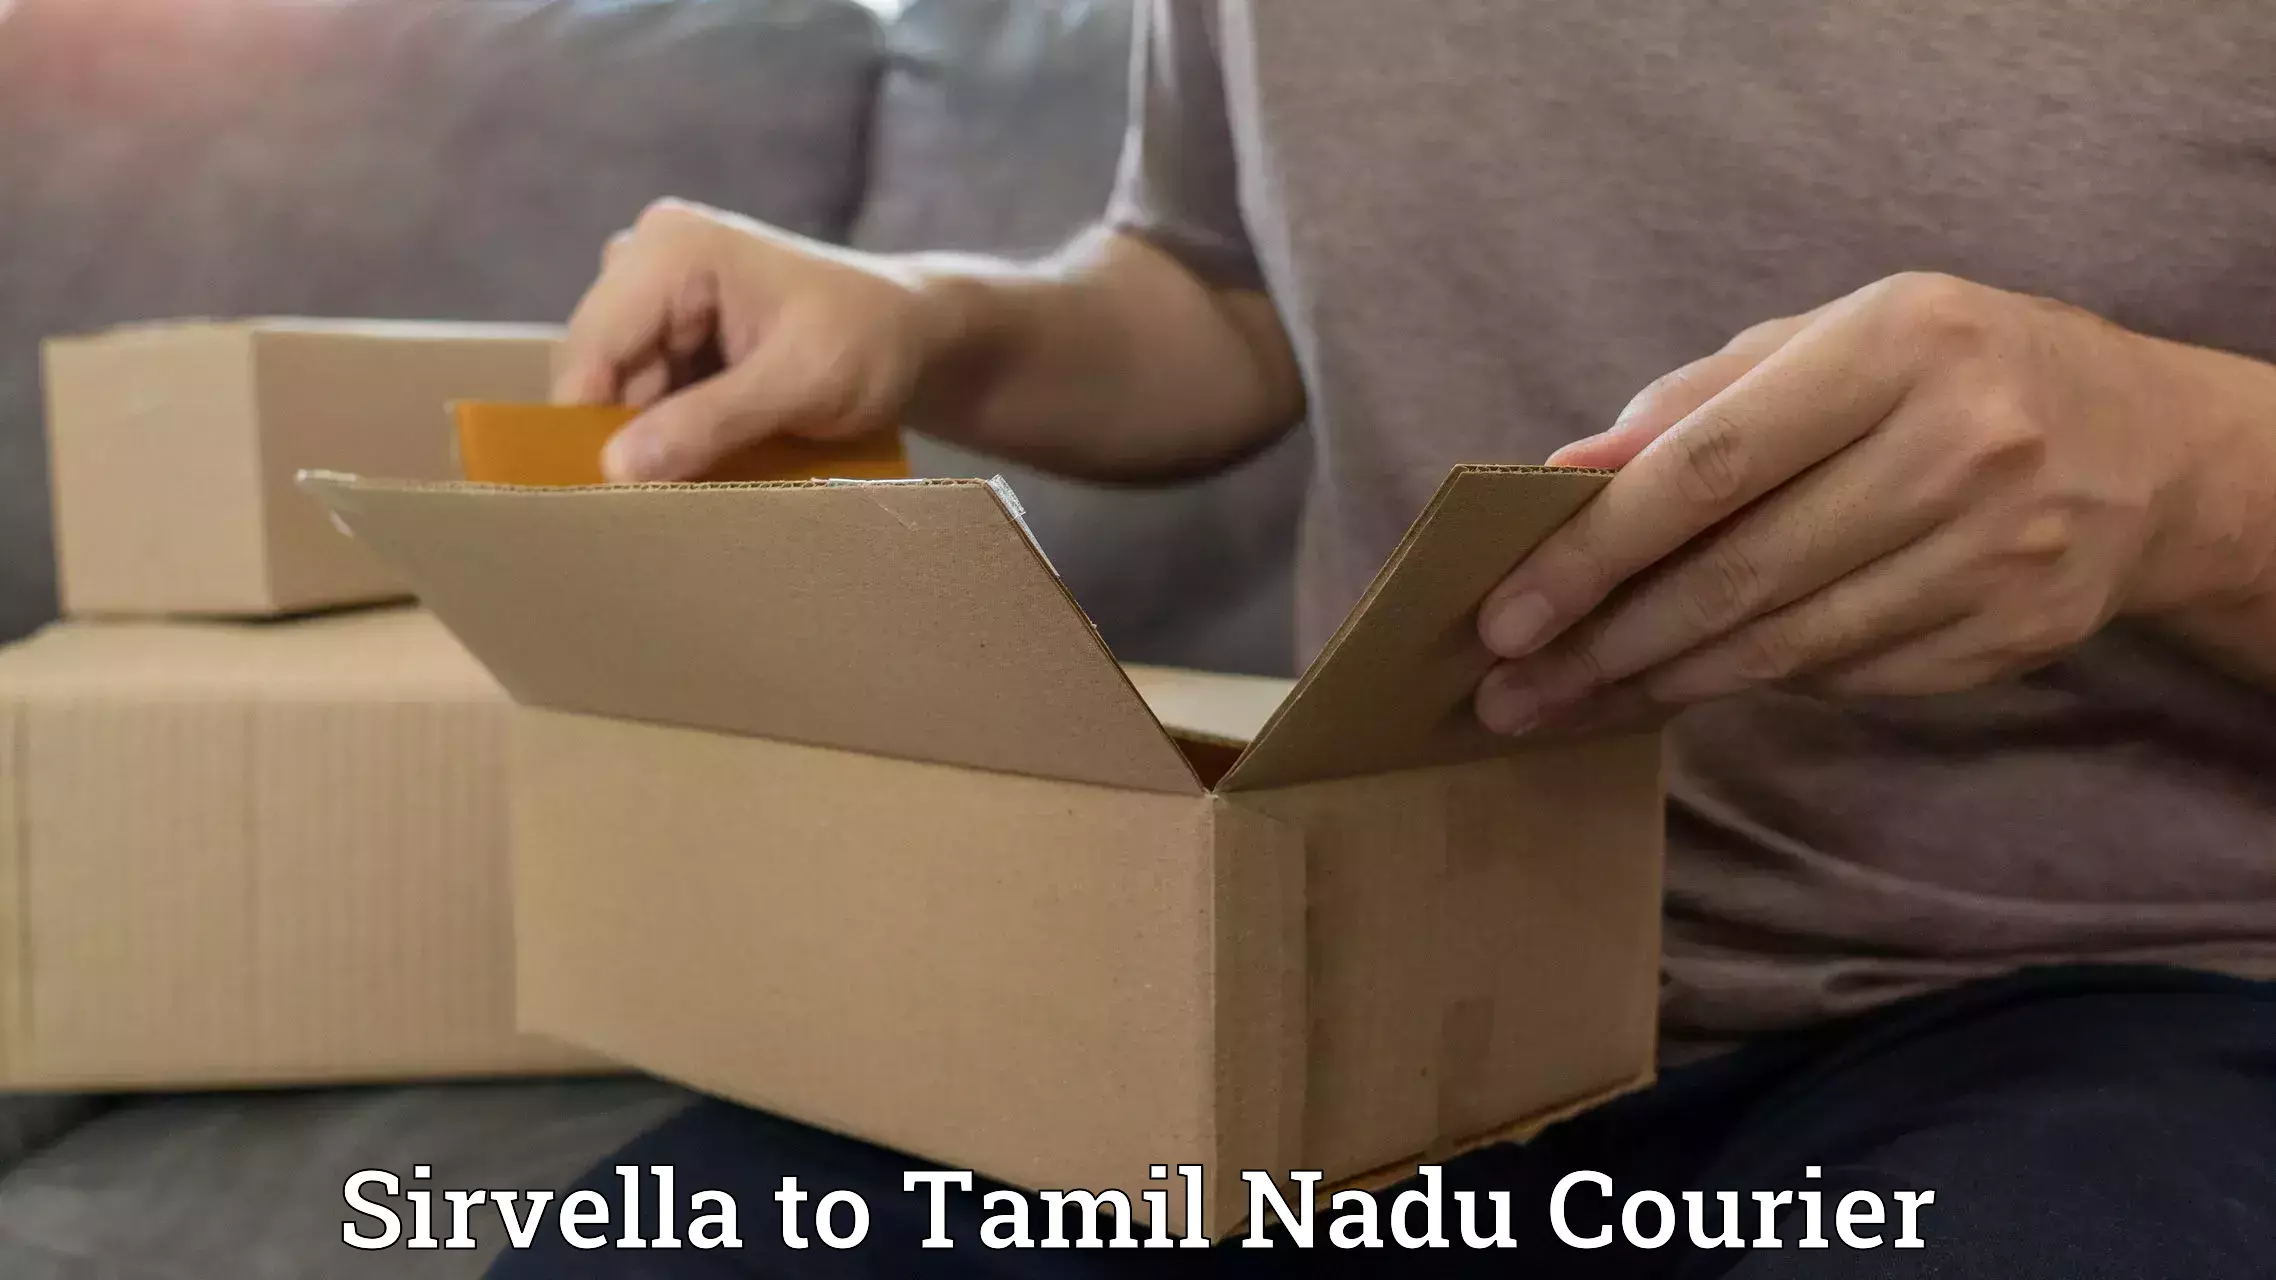 Reliable delivery network Sirvella to Tirunelveli